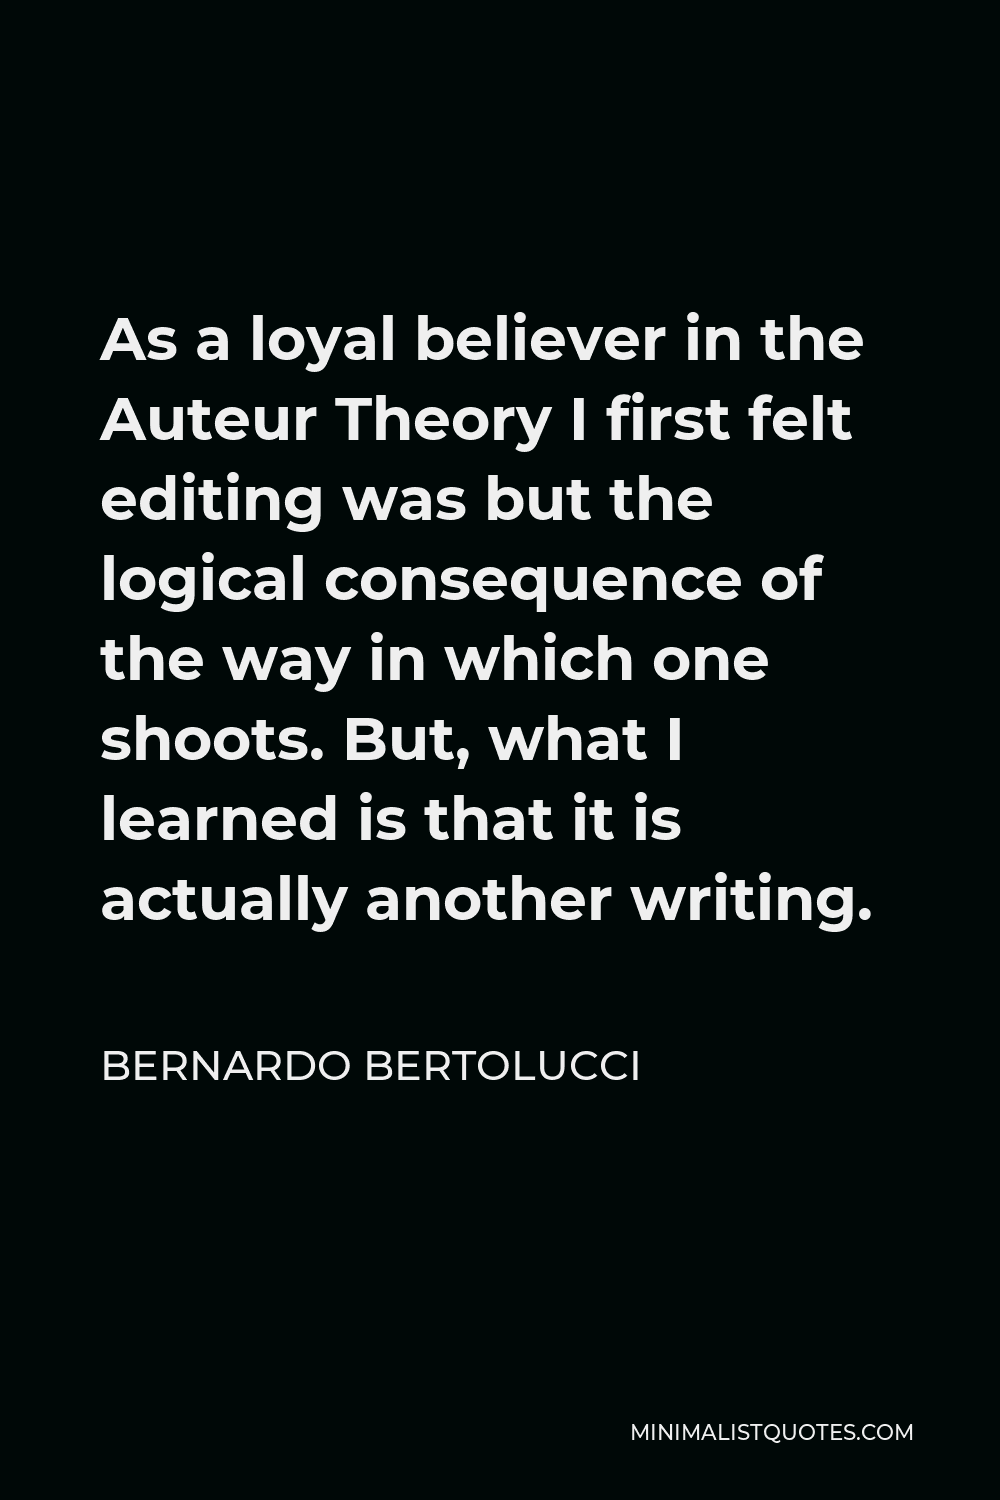 Bernardo Bertolucci Quote - As a loyal believer in the Auteur Theory I first felt editing was but the logical consequence of the way in which one shoots. But, what I learned is that it is actually another writing.